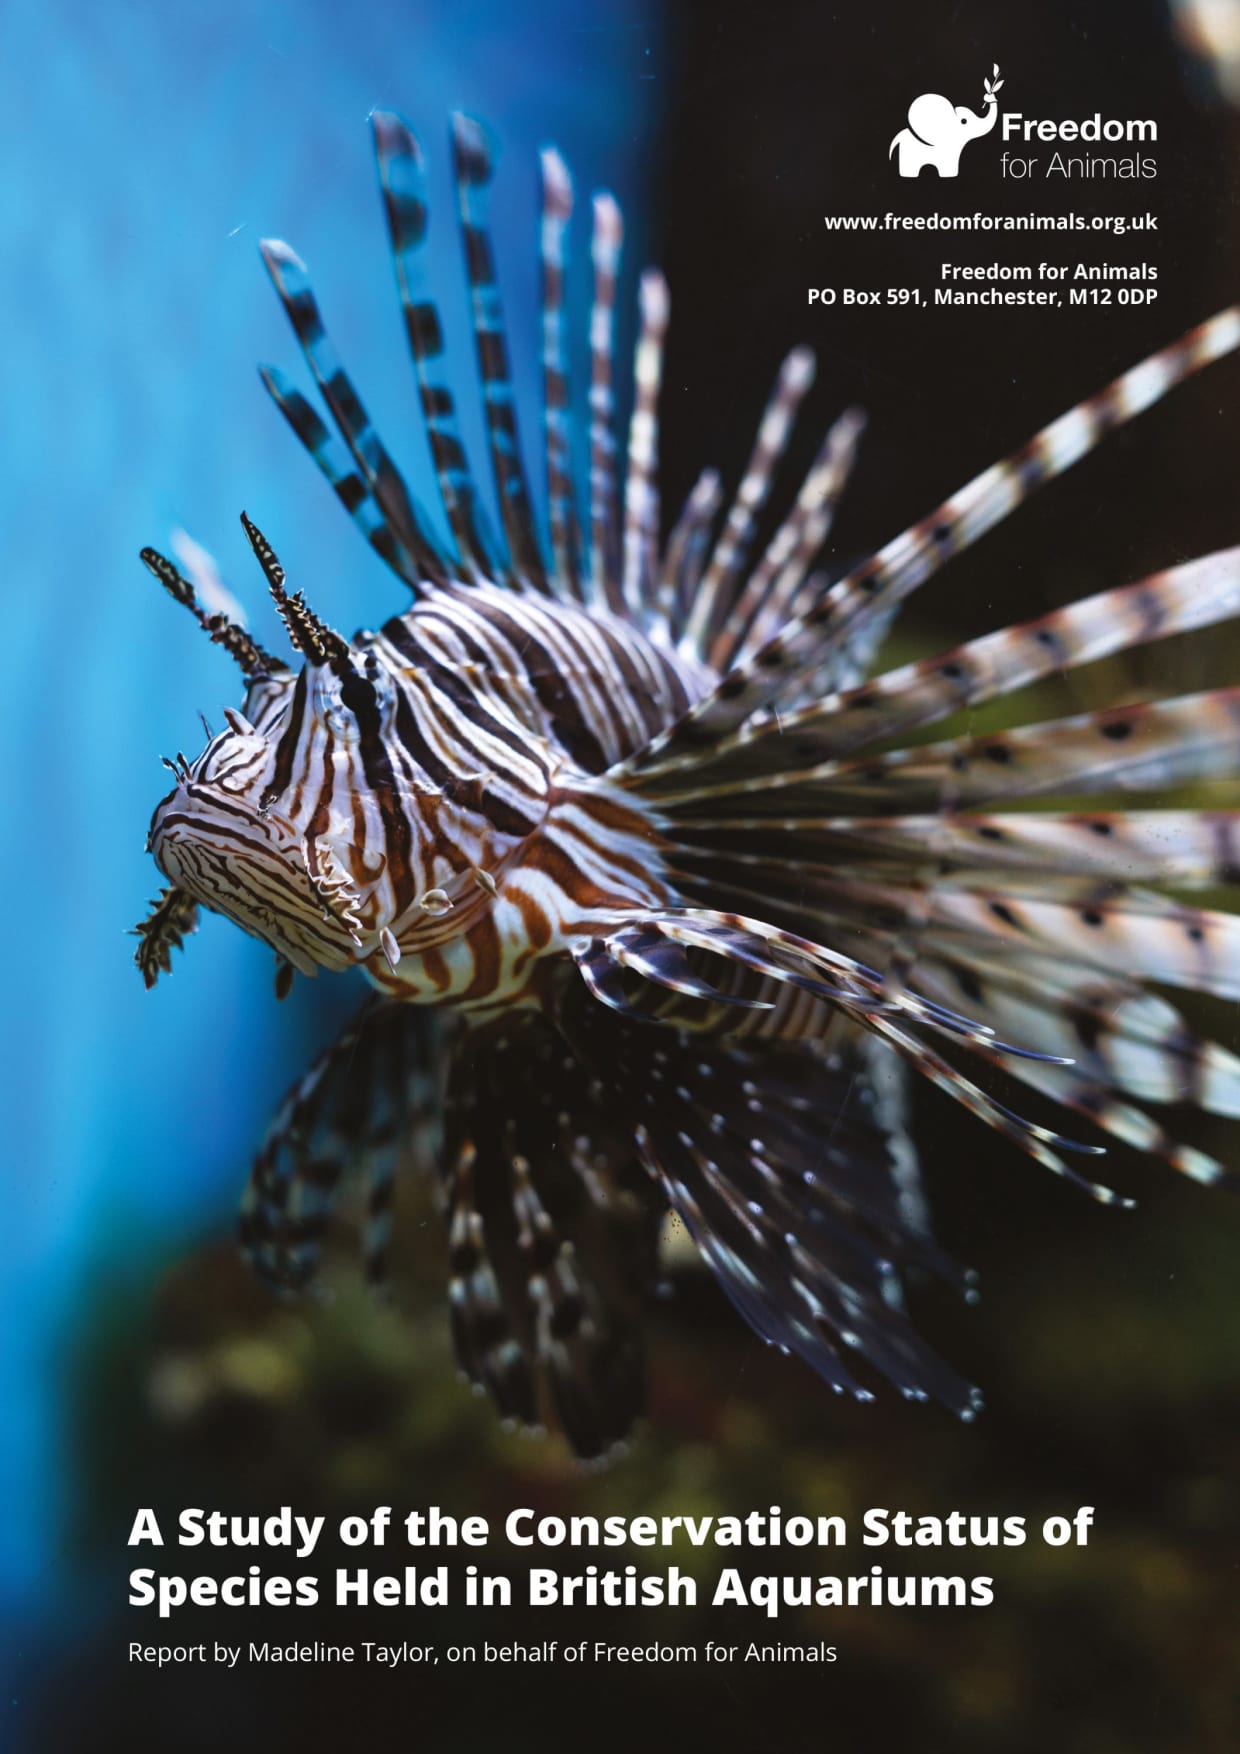 A study into the conservation status of species in aquariums in Britain